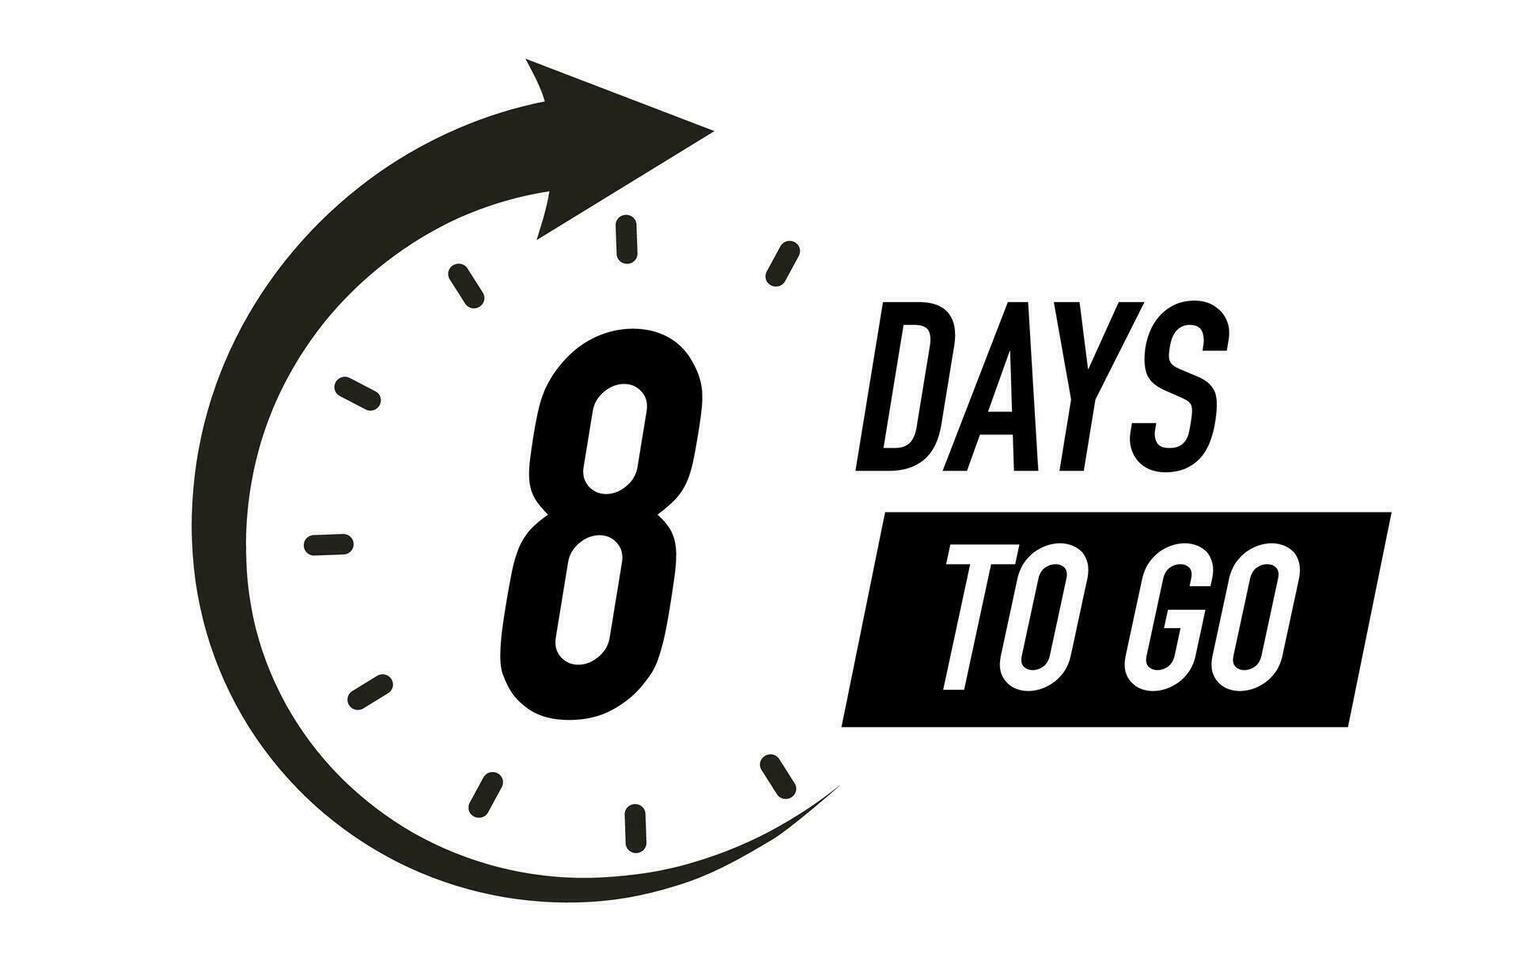 8 days to go timer symbol black color flat style vector